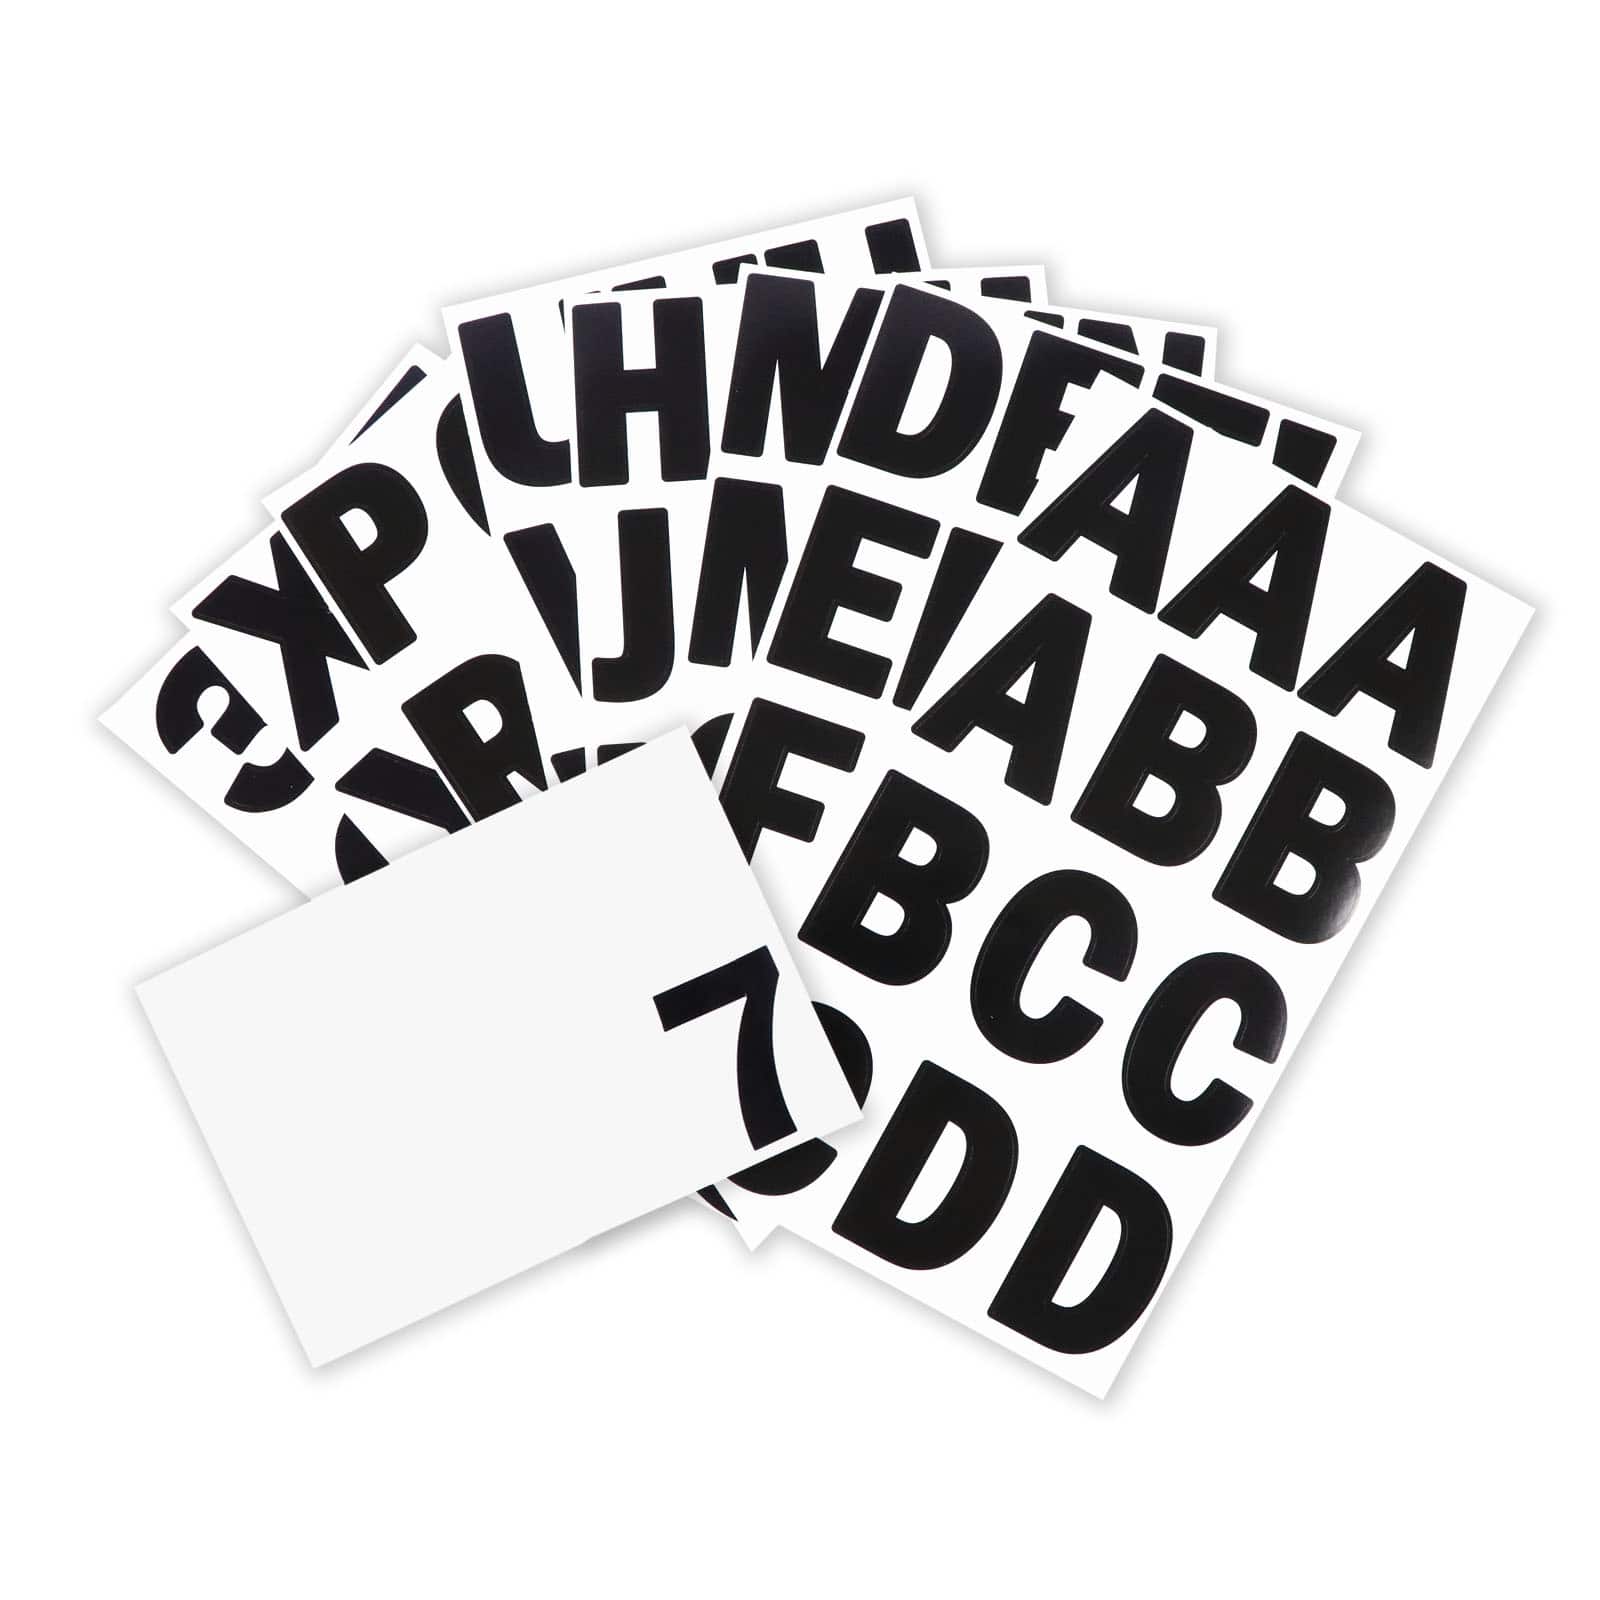 Michaels Bulk 12 Packs: 157 Ct. (1884 Total) Block Alphabet Stickers by Recollections, Size: 5.6 x 10.8, Black